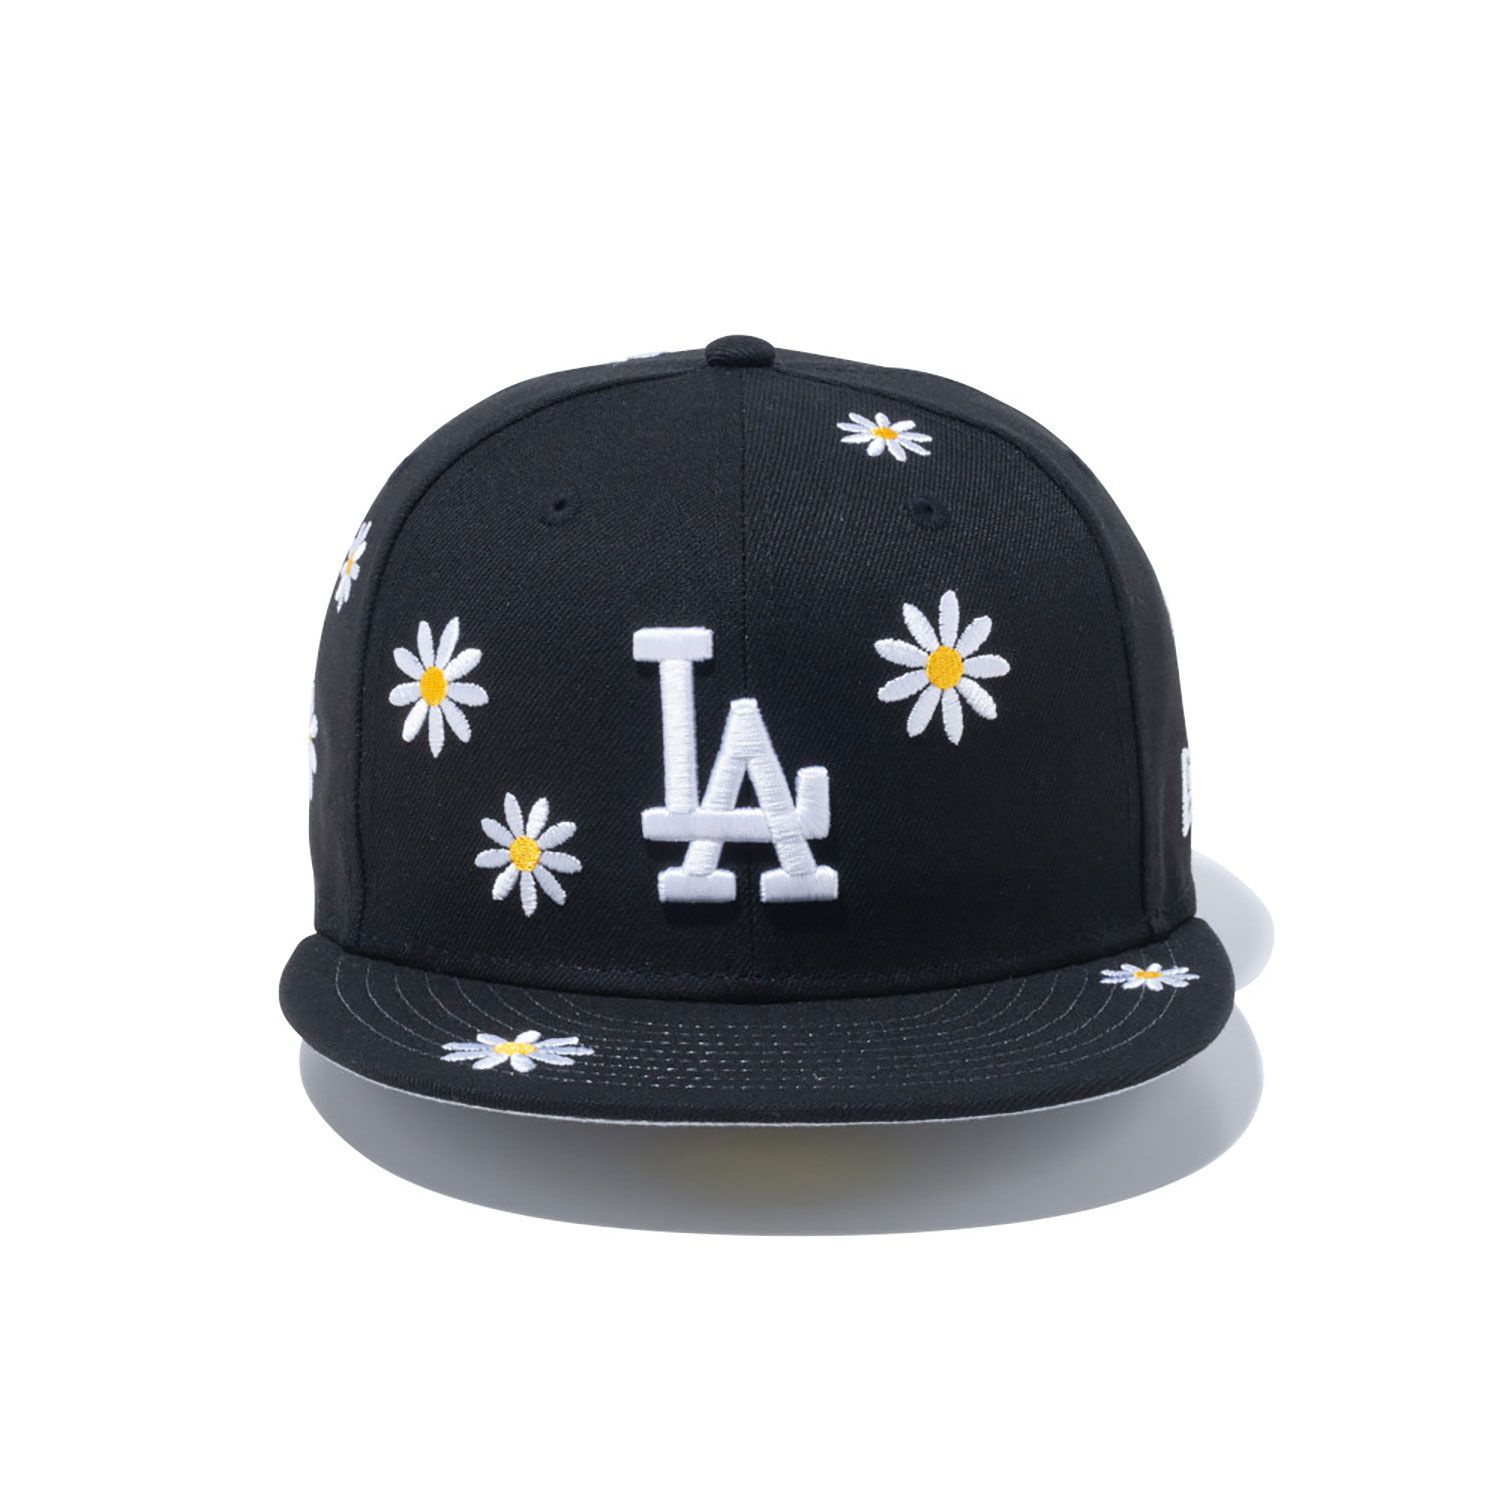 LA Dodgers Flower Embroidery New Era Japan Black 59FIFTY Fitted Cap